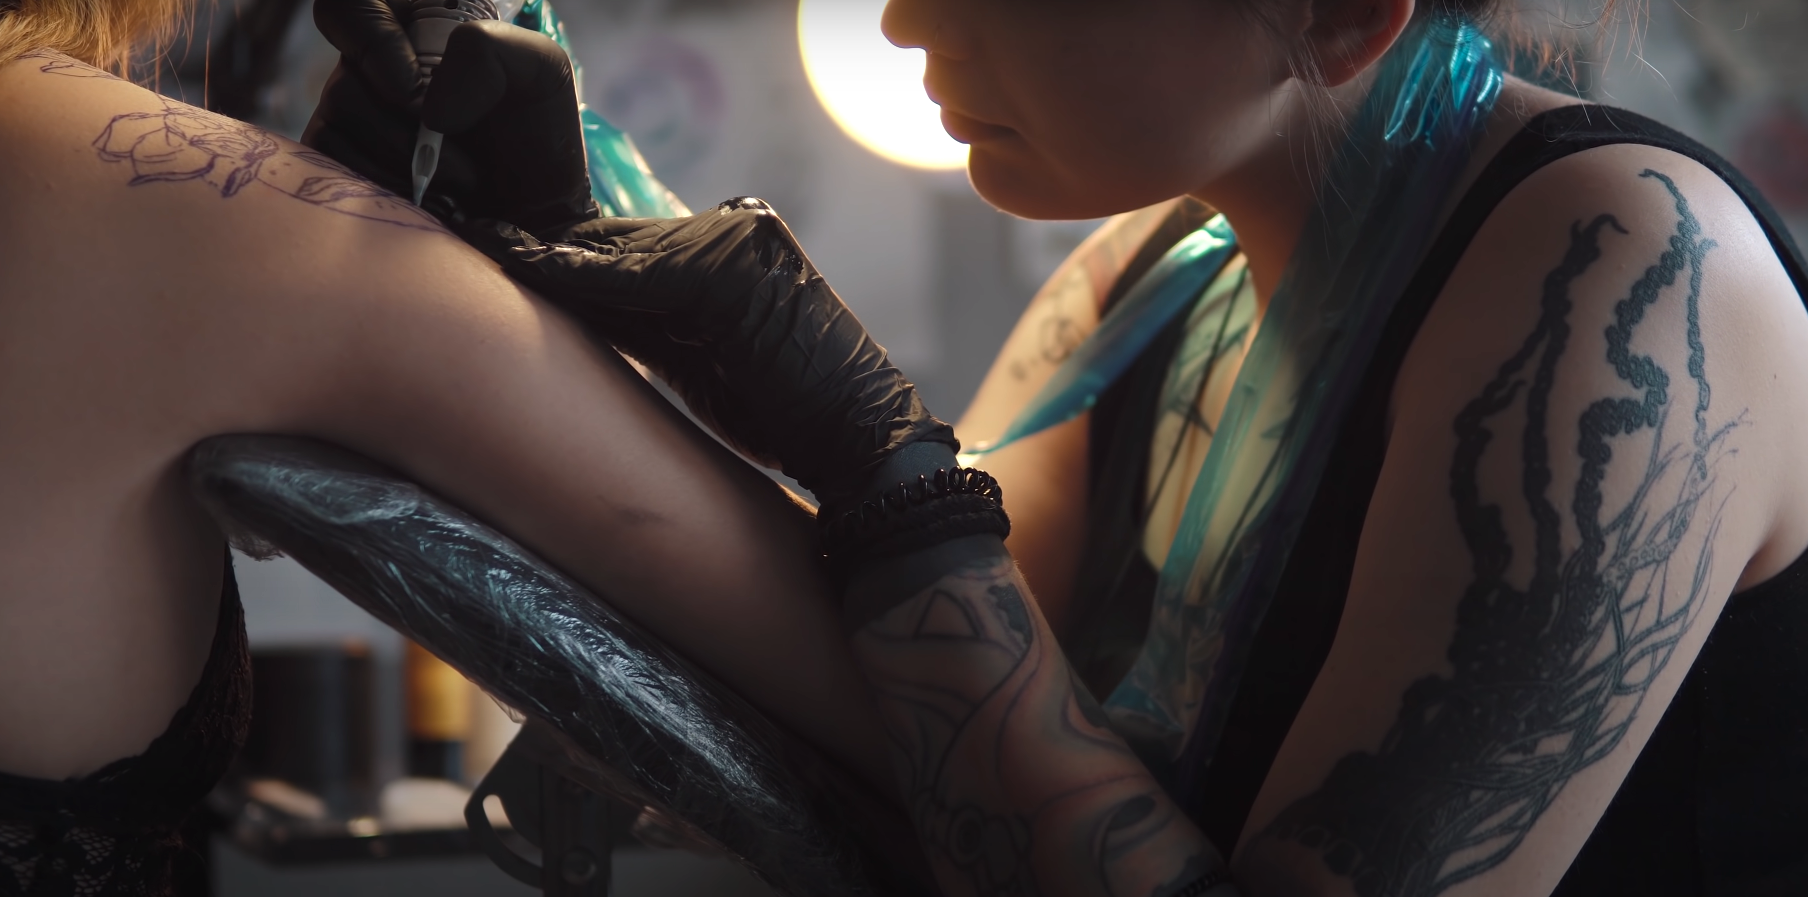 Signs That a Tattoo Parlor Might Not Be Hygienic or Have Quality Equipment